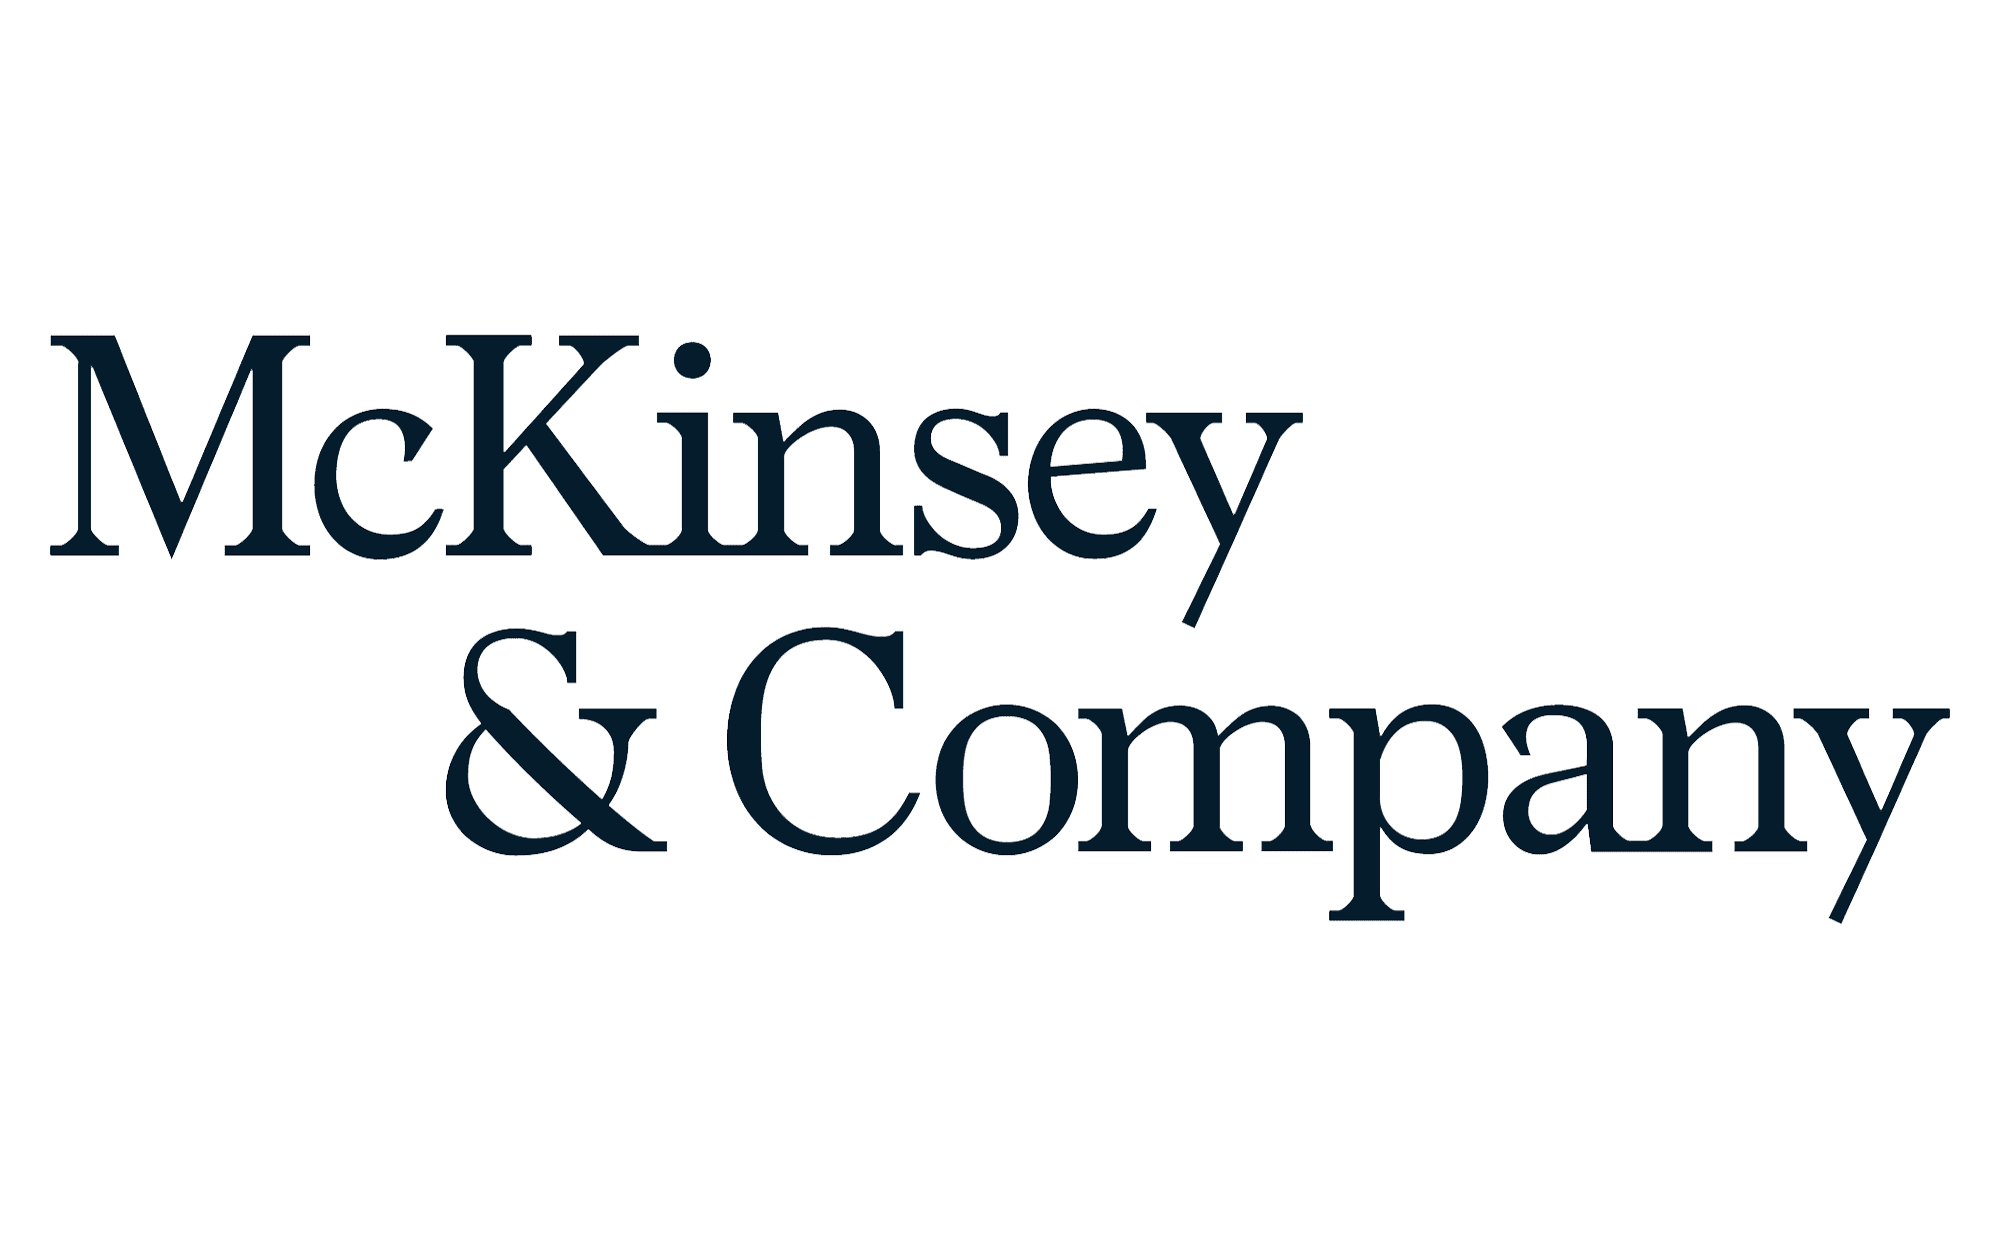 McKinsey & Company logo in dark blue text on a transparent background